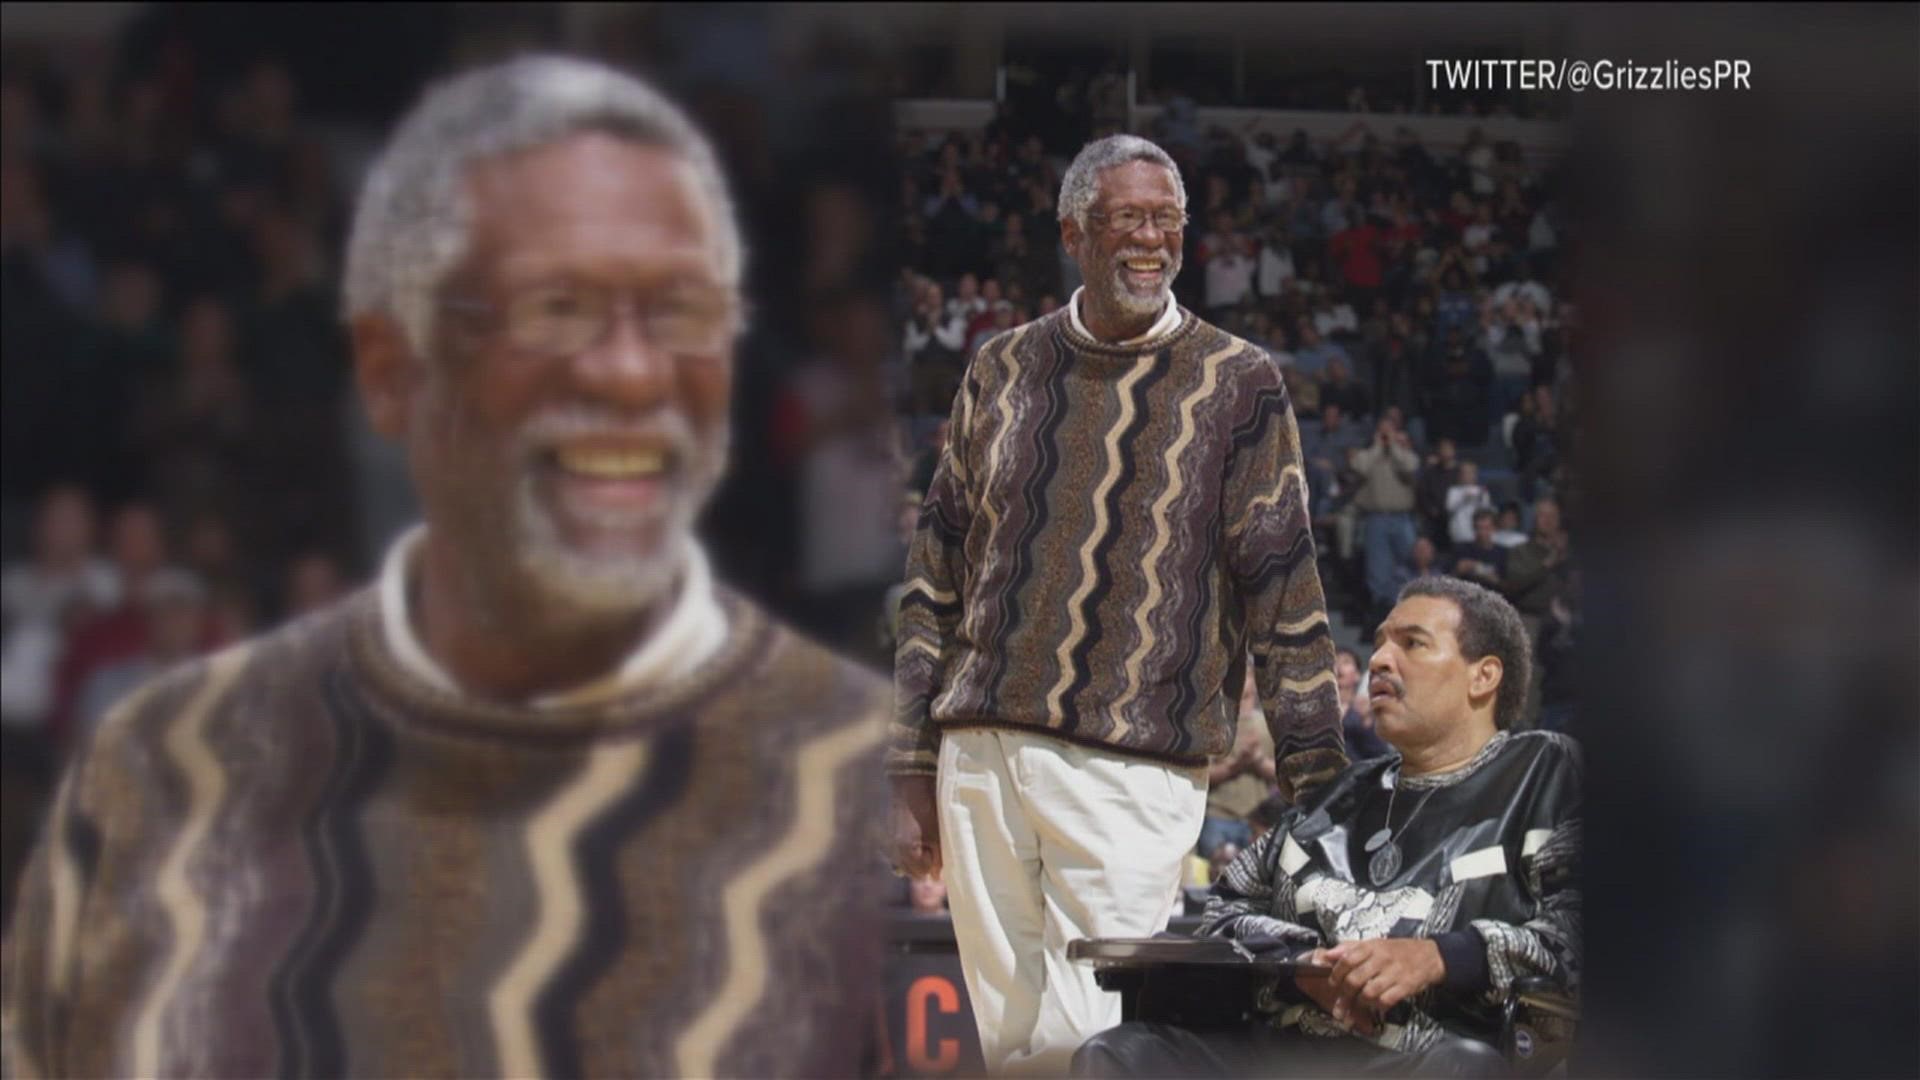 ABC24 political analyst and commentator Otis Sanford shared his point of view on the legacy of NBA legend Bill Russell.